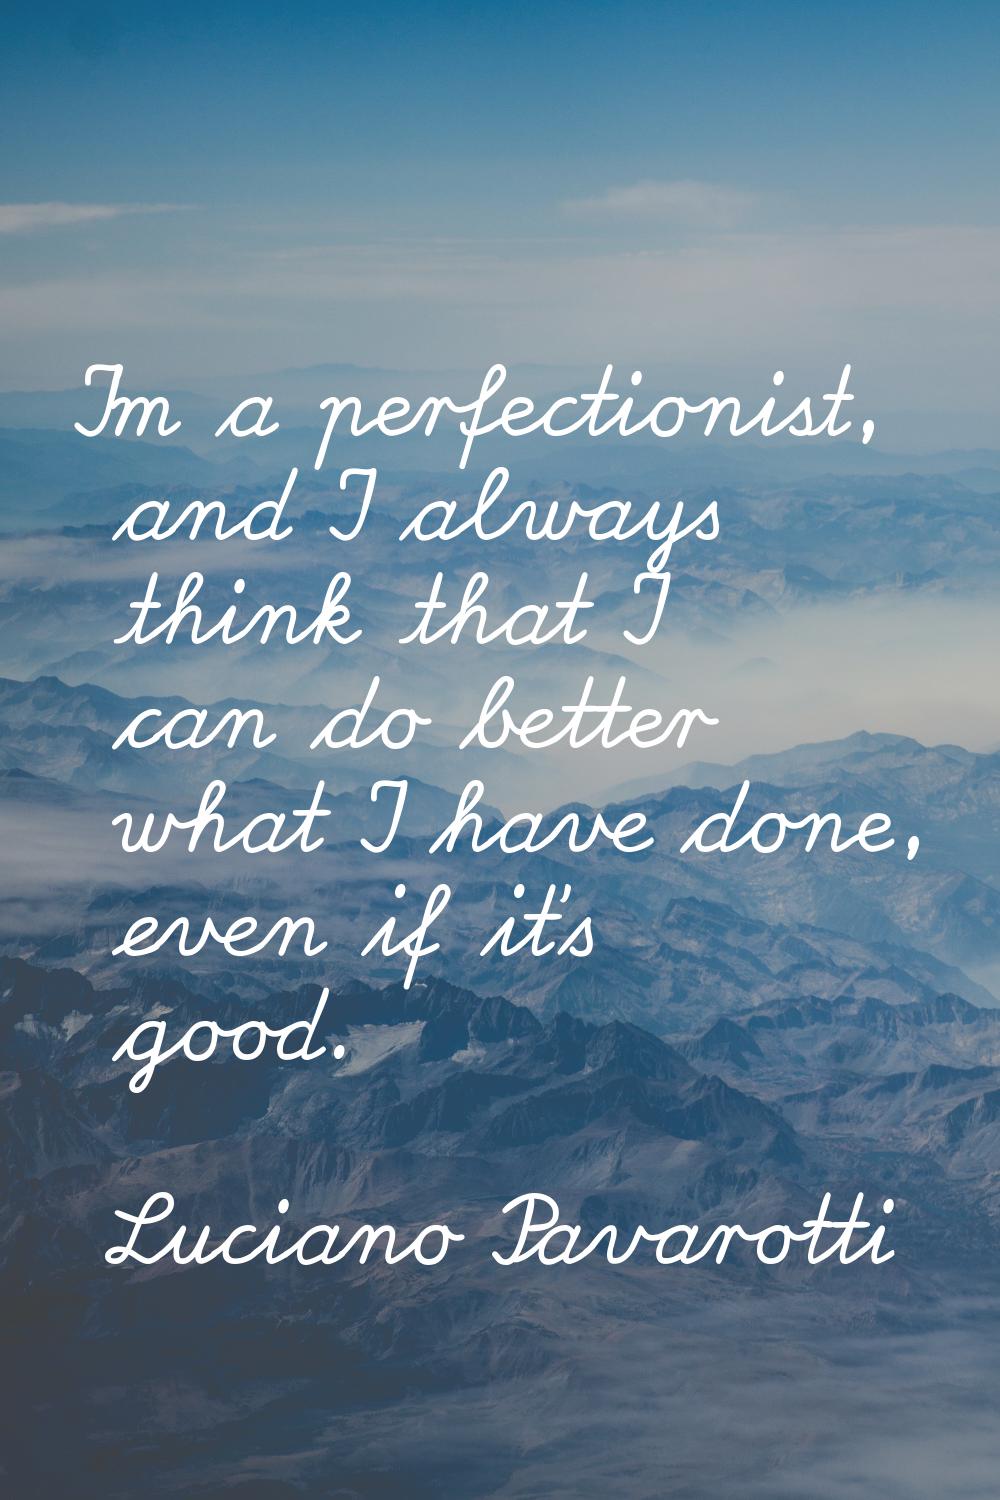 I'm a perfectionist, and I always think that I can do better what I have done, even if it's good.